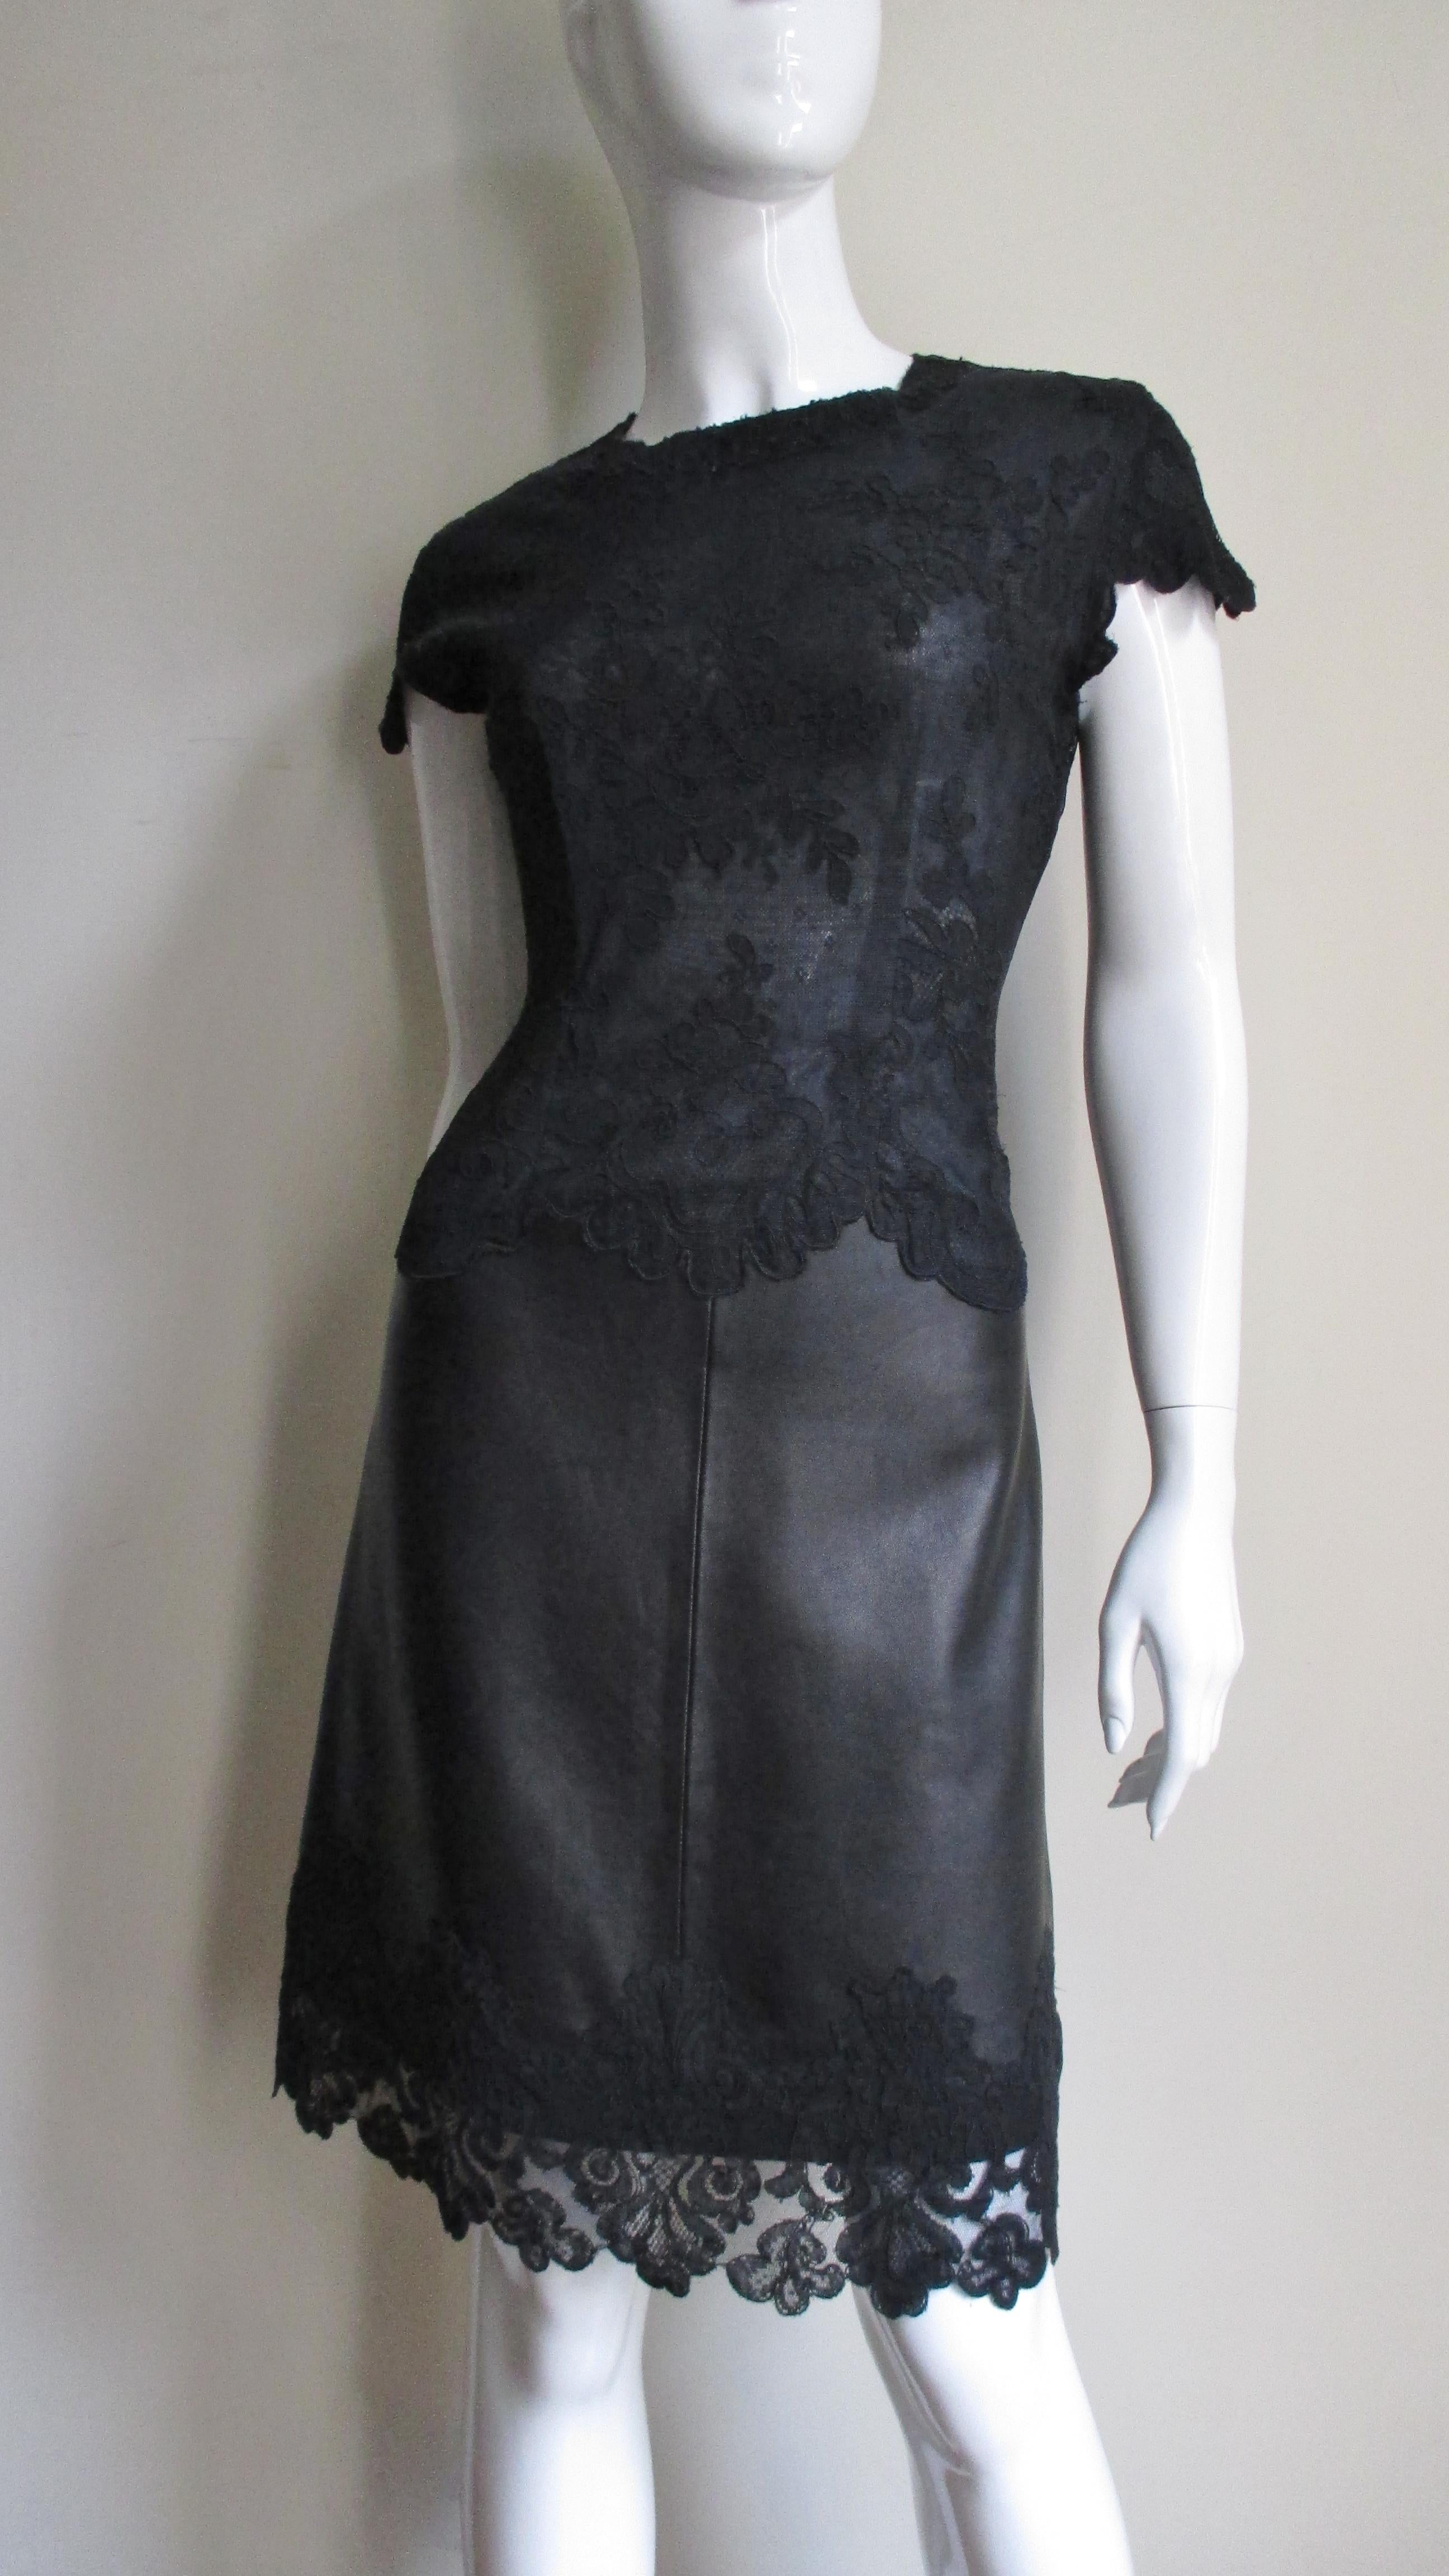 A fabulous black leather and lace dress by Gianni Versace.  It has flower pattern lace cap sleeve semi fitted bodice and around the hem.  The leather skirt portion has a subtle A line. The dress closes in the back with an invisible zipper and is